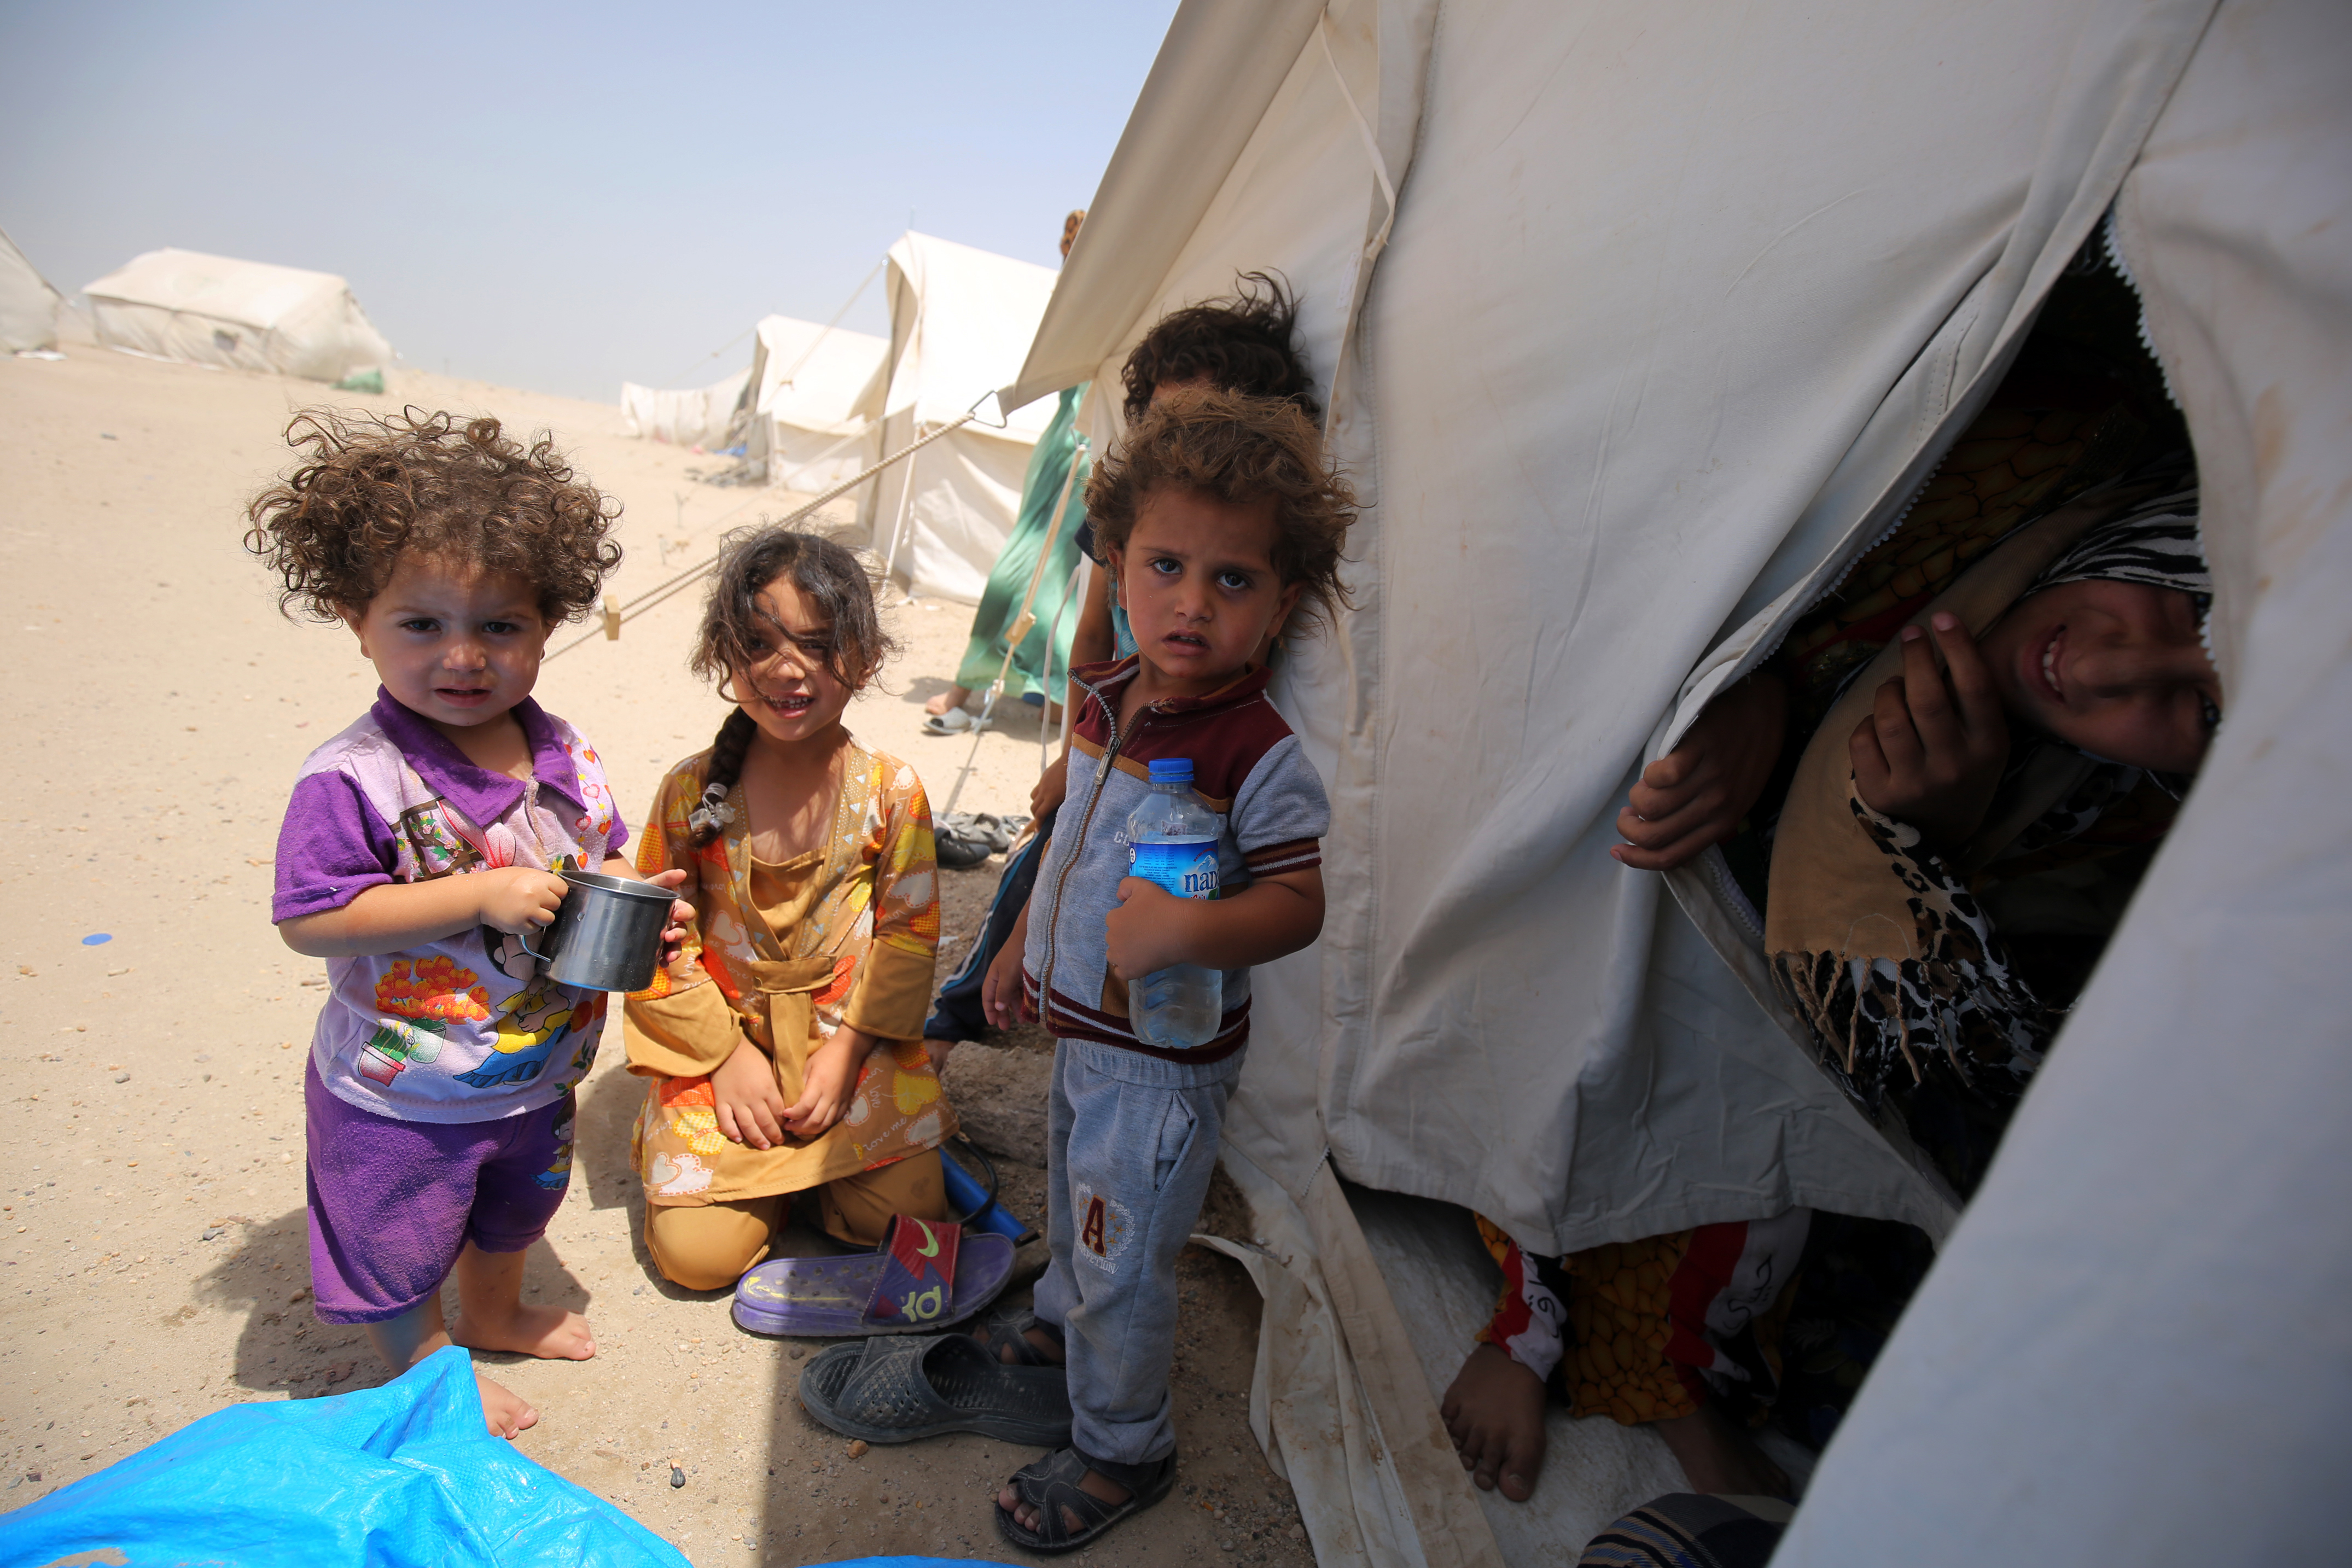 Iraqi children displaced from the city of Fallujah gather next to a tent at a newly opened camp where hundreds of displaced Iraqis are taking shelter in Amriyat al-Fallujah on June 27, 2016, south of Fallujah. Iraqi forces on June 26 wrapped up operations in Fallujah and declared the area free of jihadists from the Islamic State (IS) group after a month-long operation. The government said the destruction caused by the fighting was limited and vowed to do its utmost to allow the tens of thousands of displaced civilians to return to their homes.  / AFP PHOTO / AHMAD AL-RUBAYE